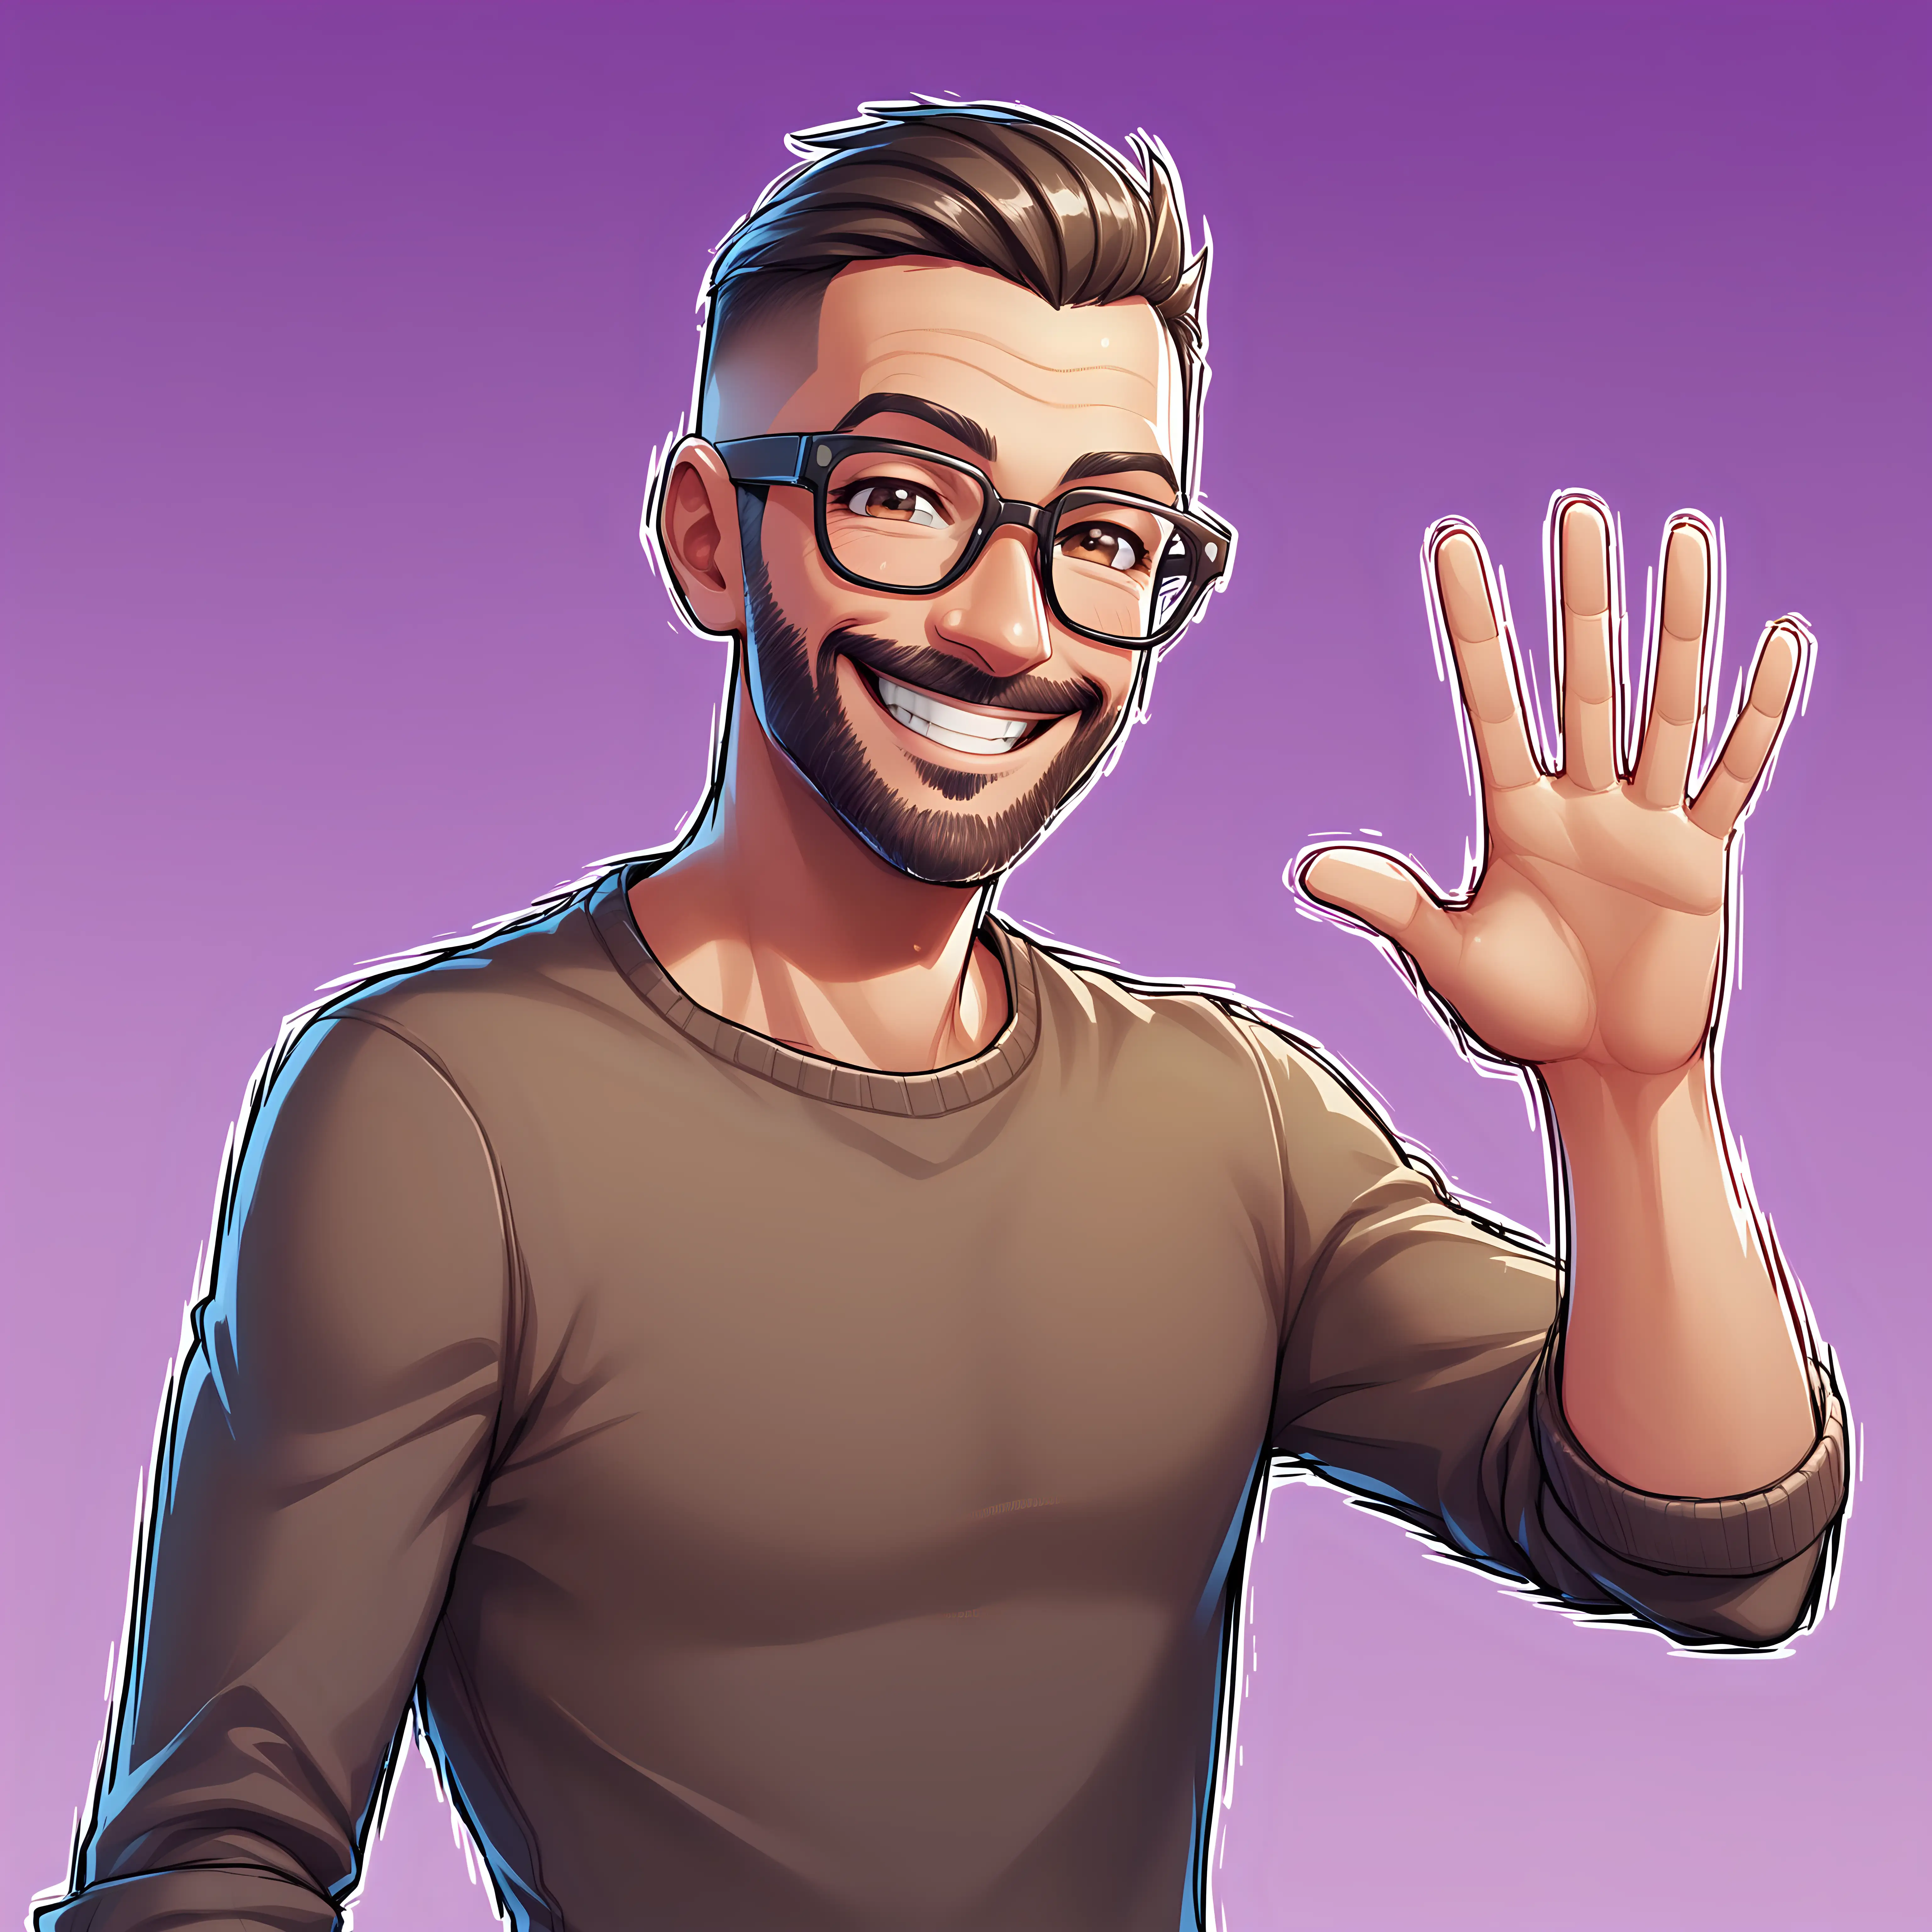 Smiling Skinny 40YearOld Male Fortnite Character Waving and Smiling